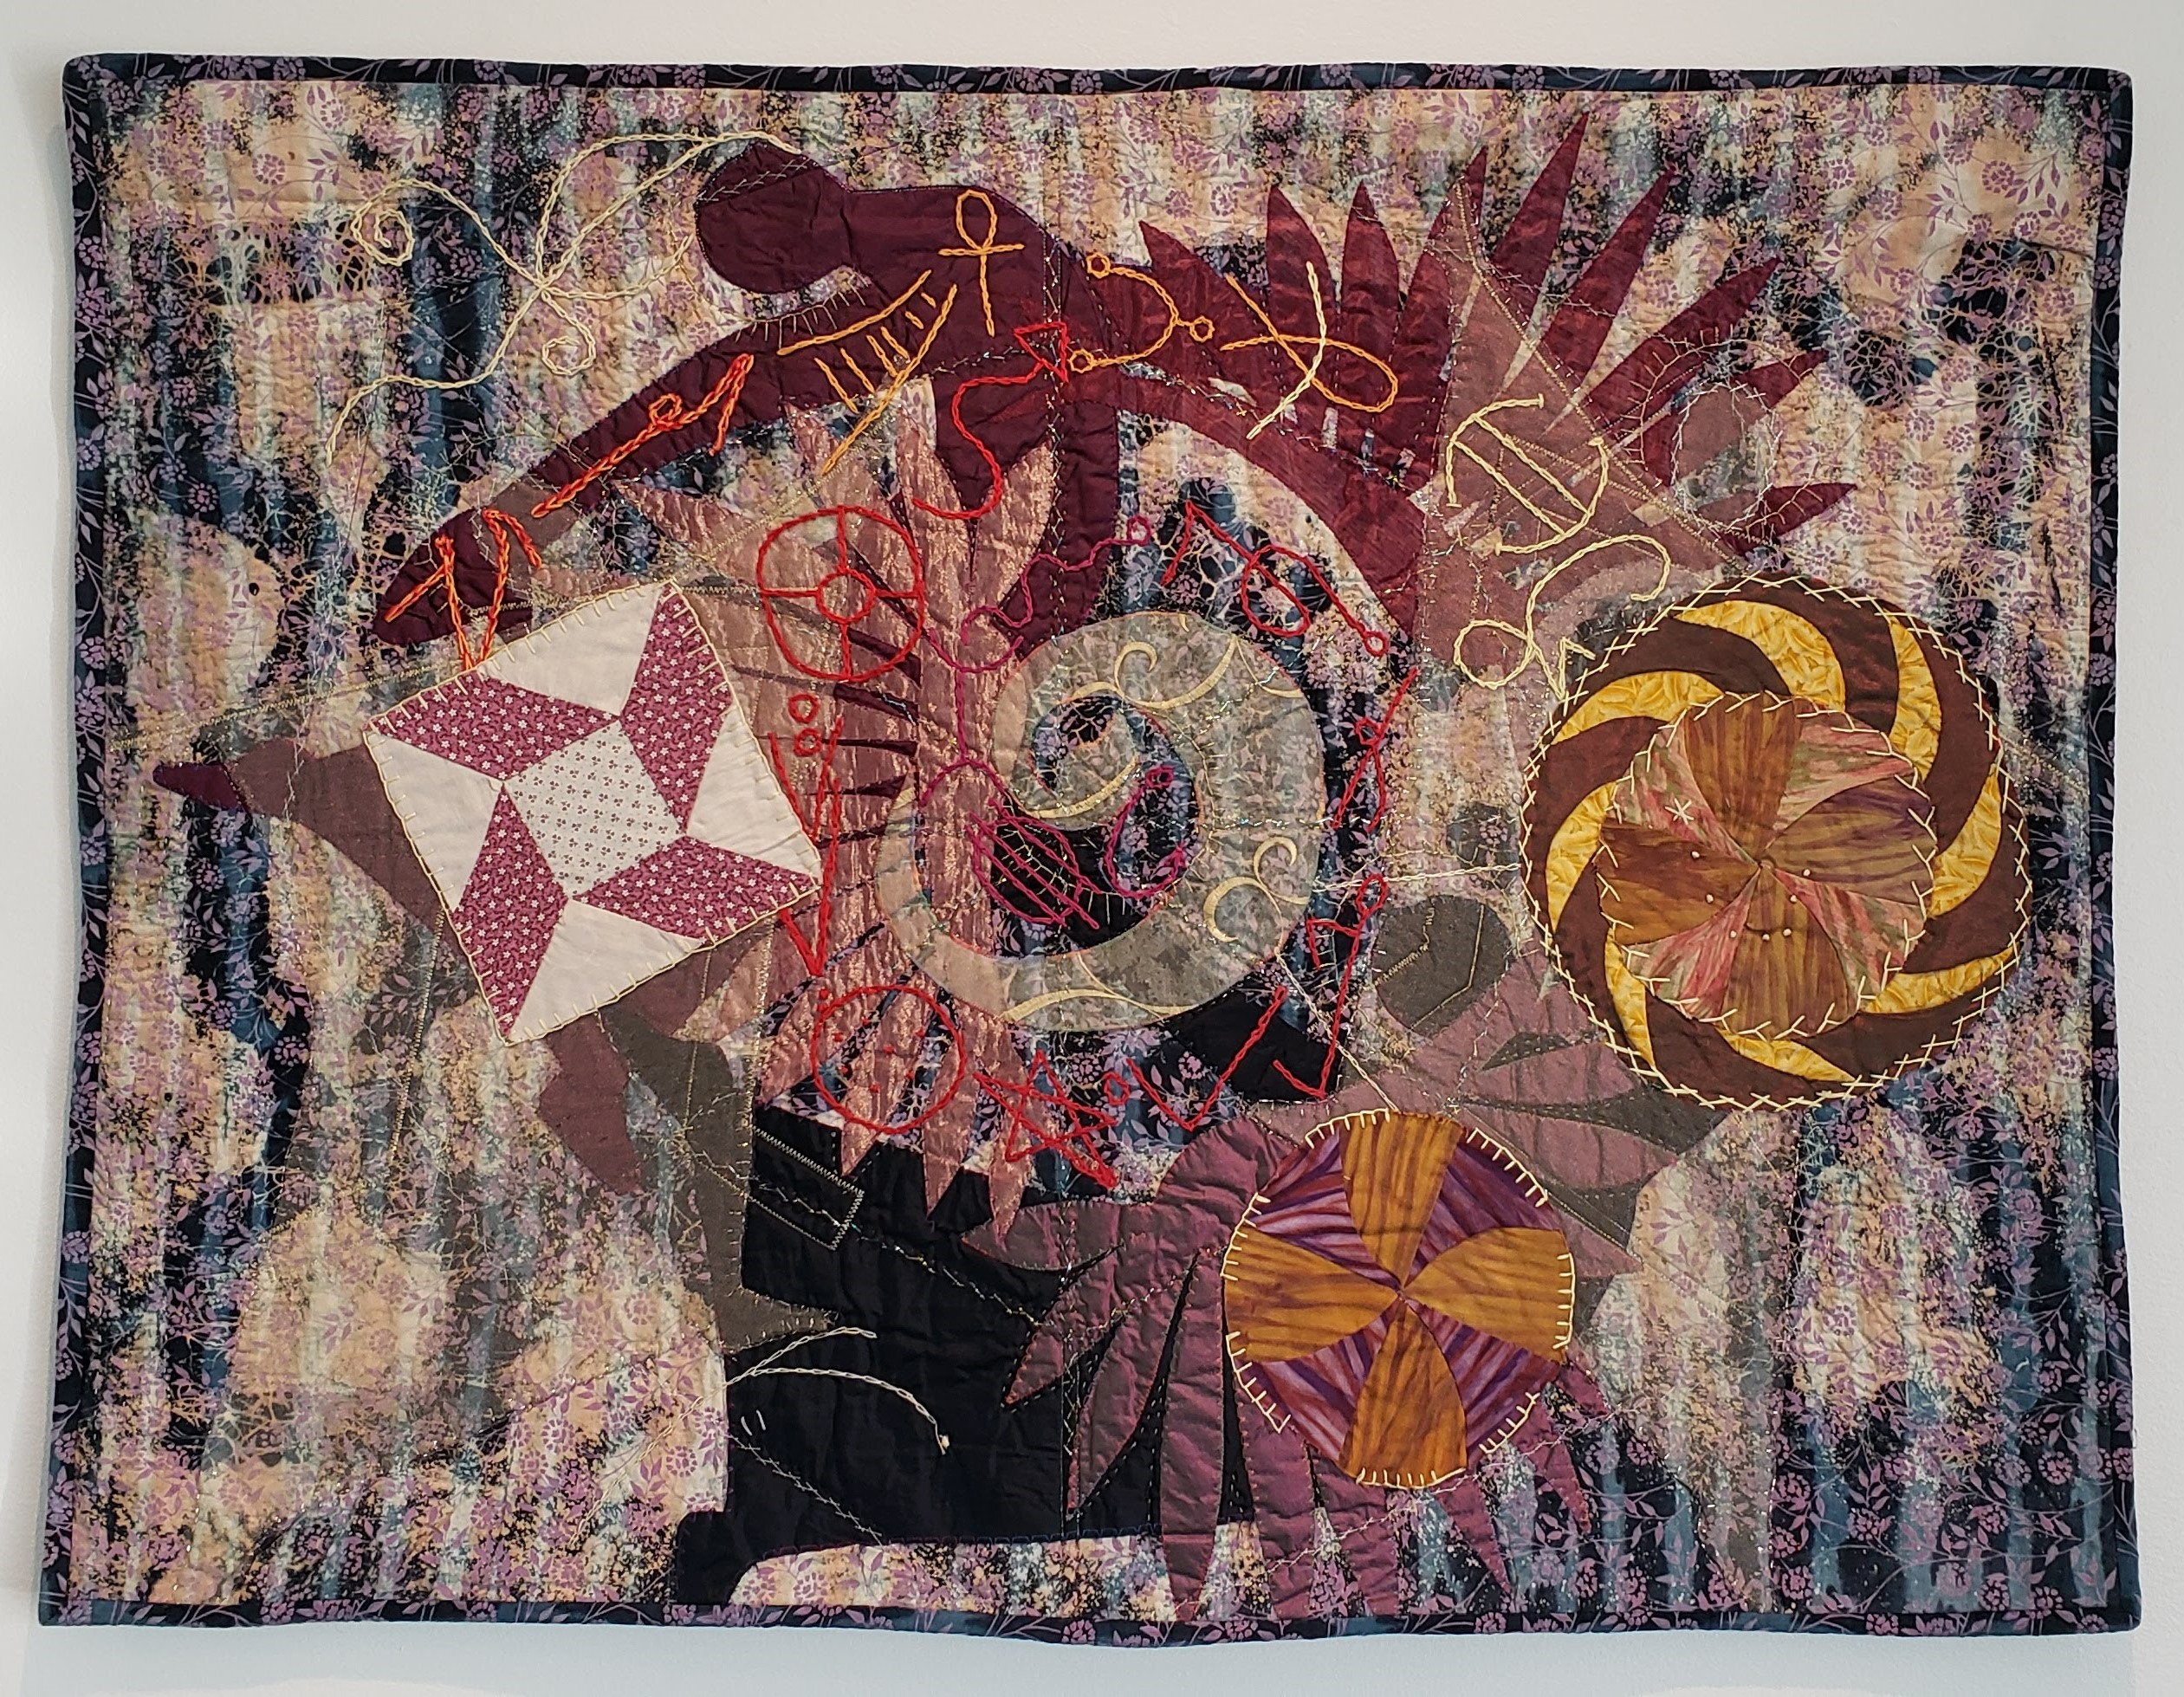 Tina Williams Brewer, "Whirling Dance and the Unconscious Rhythm," 2007, Discharged batik fabric, silk, taffeta, tulle, organza, domestic cotton, cotton embroidery floss, silk thread, invisible thread, metallic thread, hand embroidered, hand and machine quilted